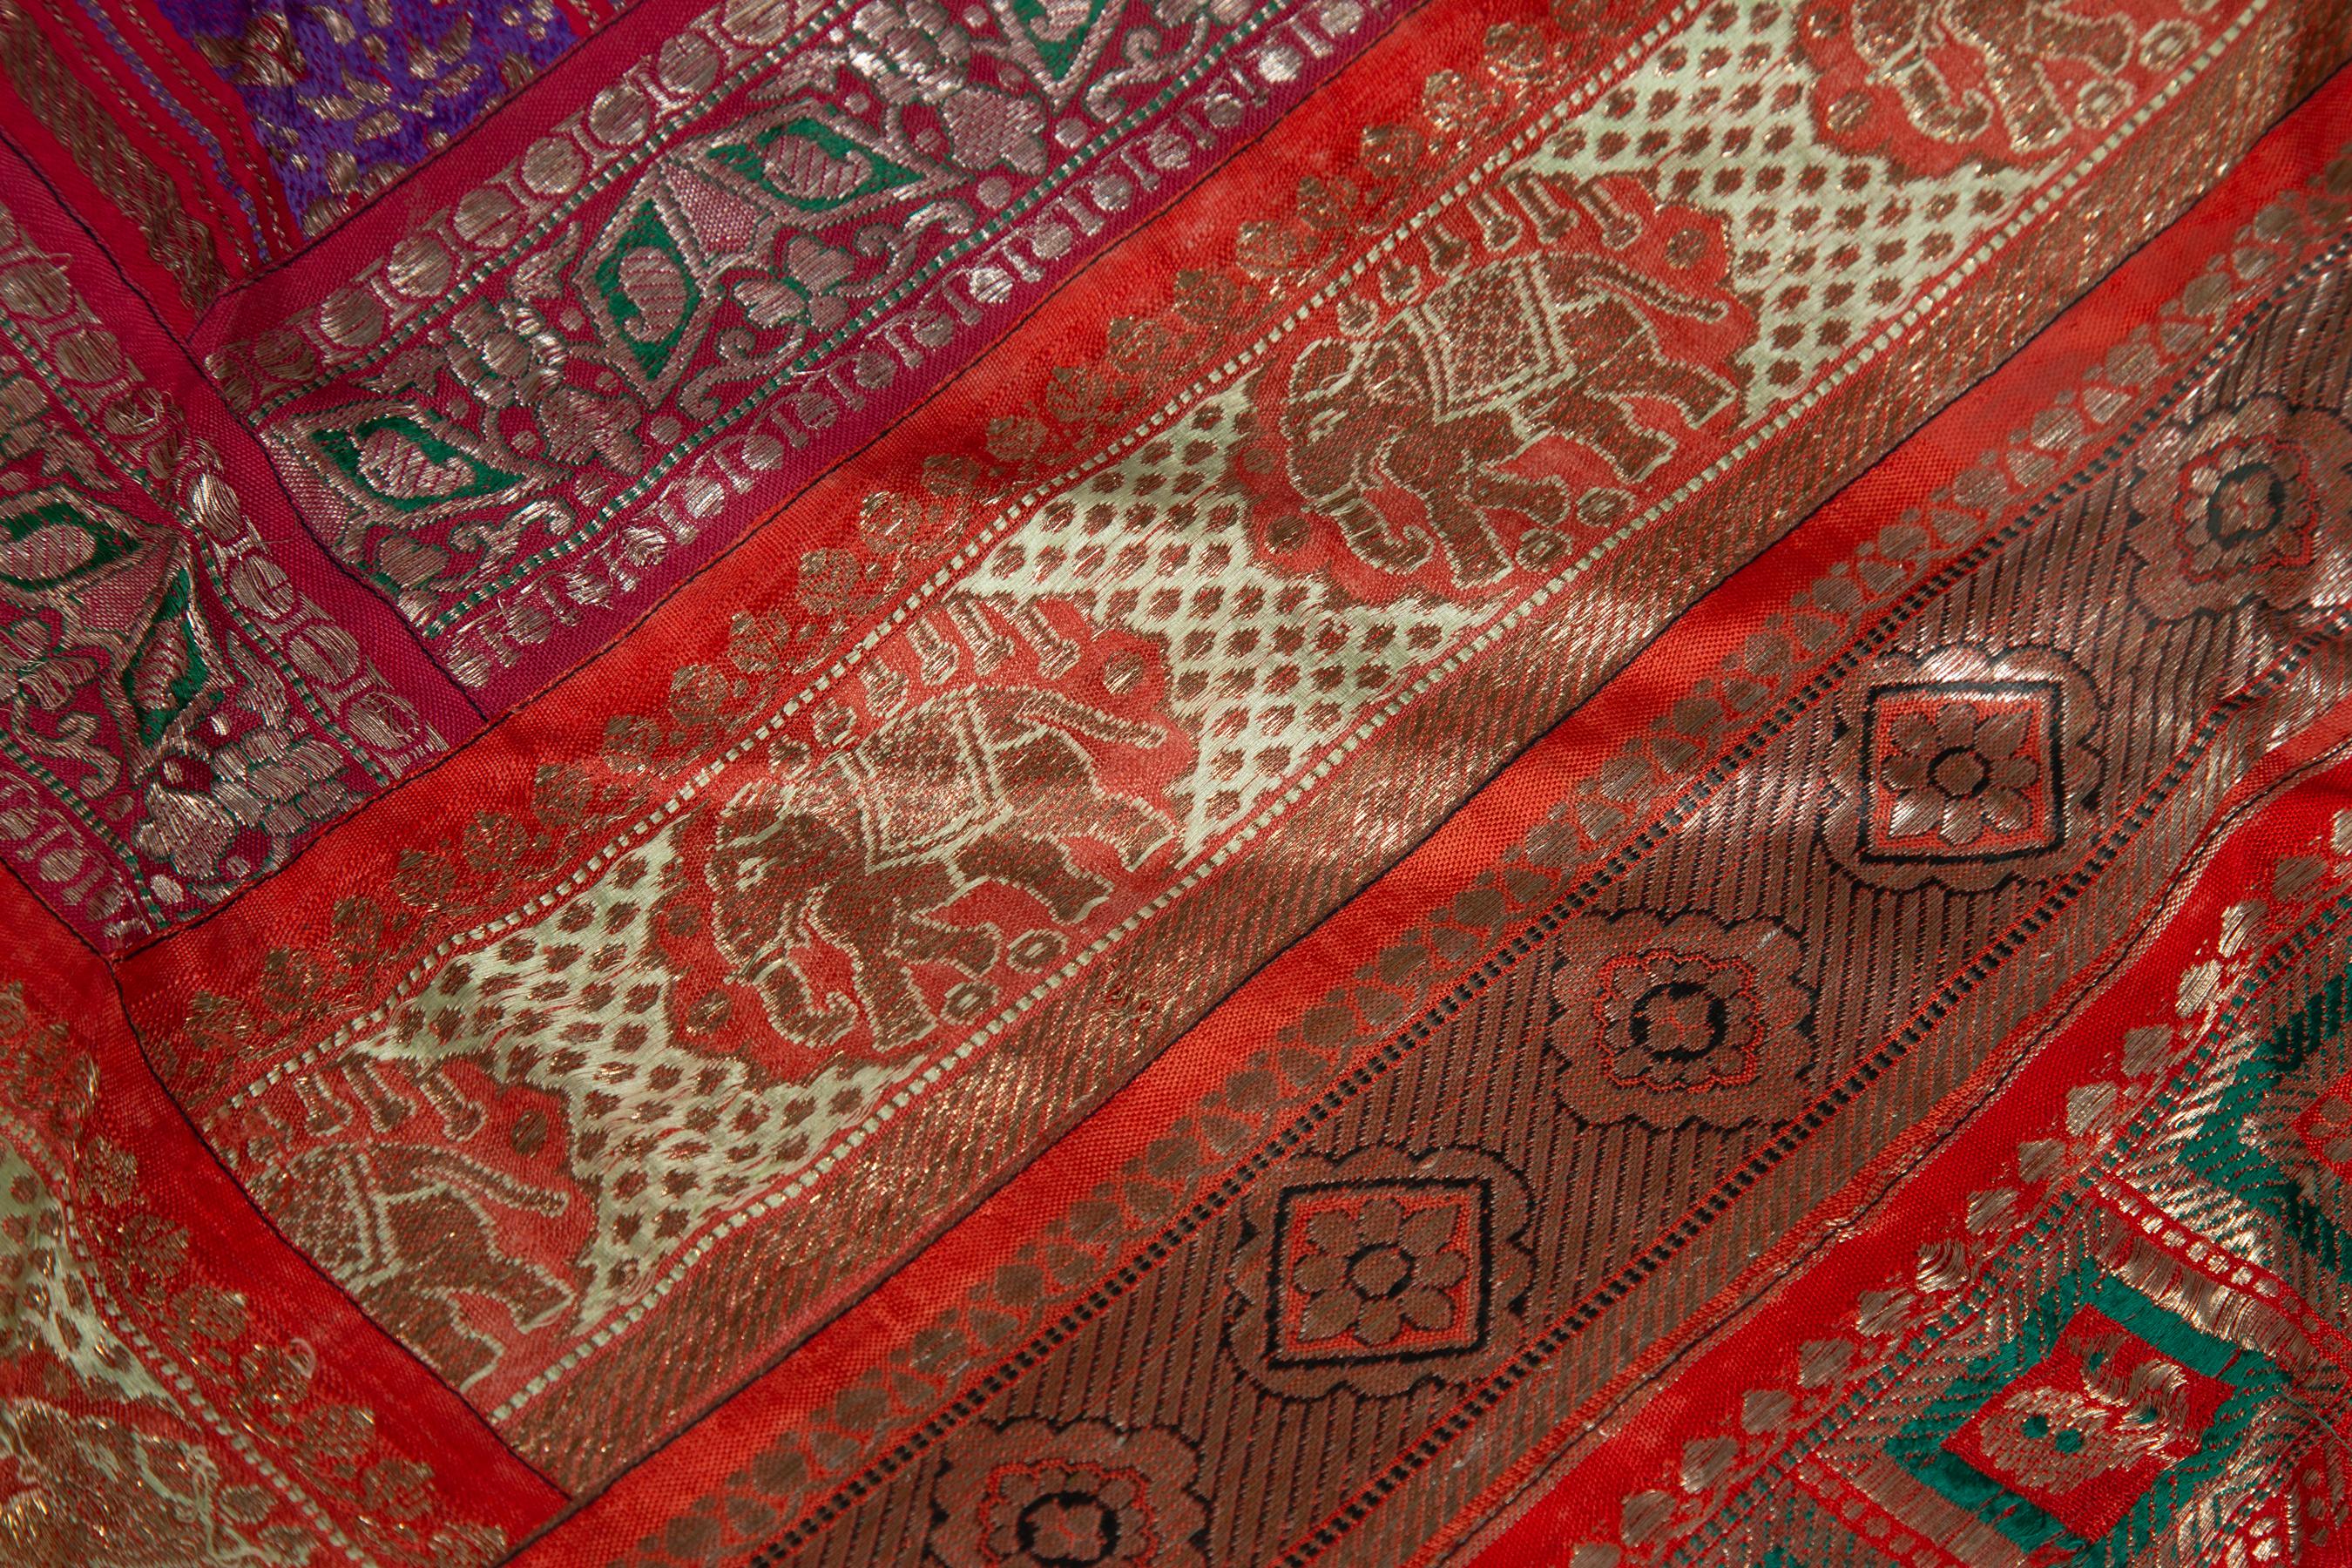 Vintage Indian Silk Embroidered Fabric with Red, Orange, Purple and Golden Tones For Sale 1